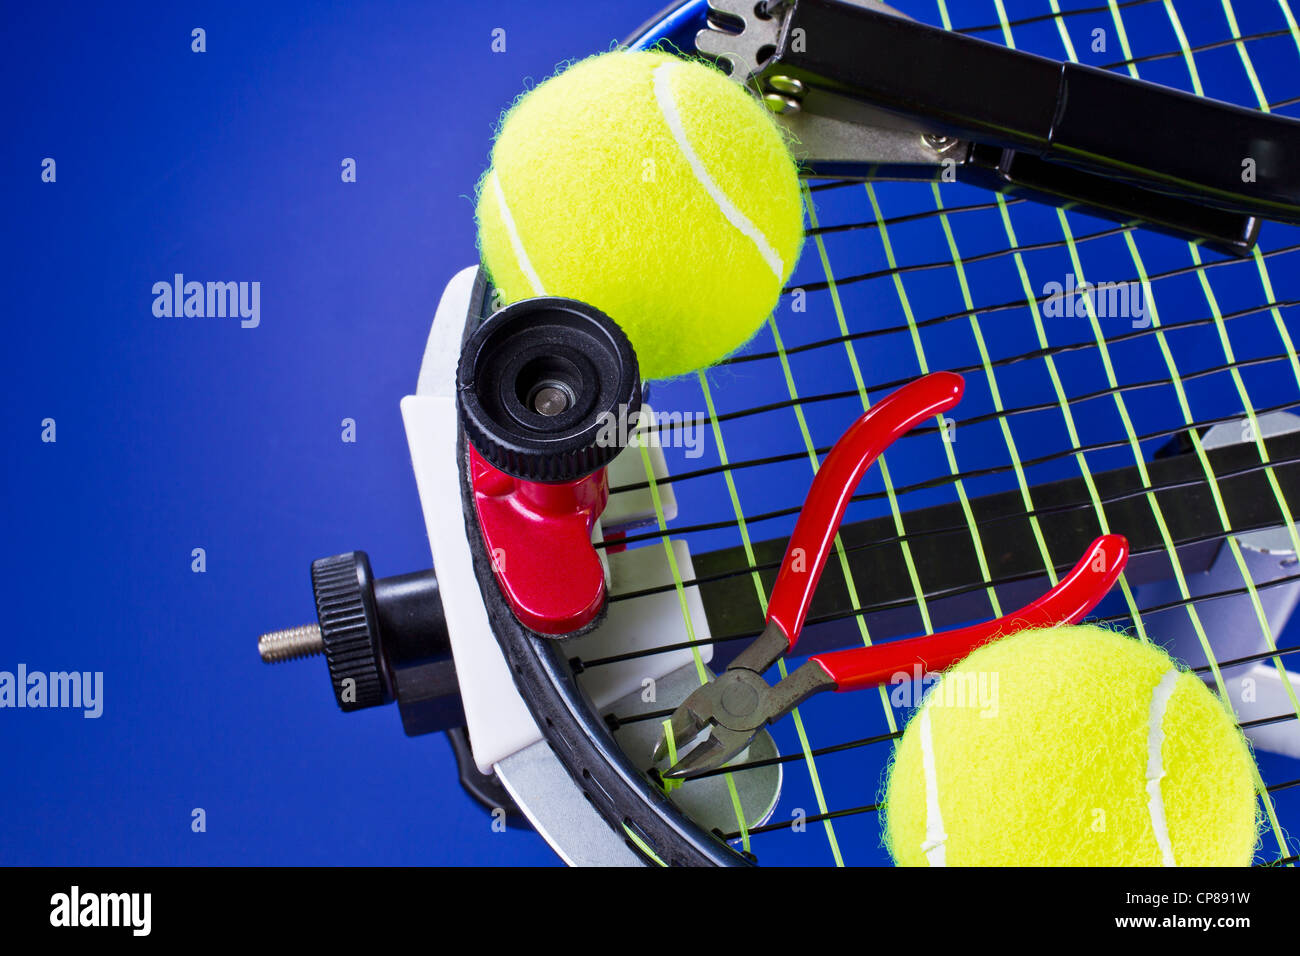 manual stringing of a badminton racket in service Stock Photo - Alamy